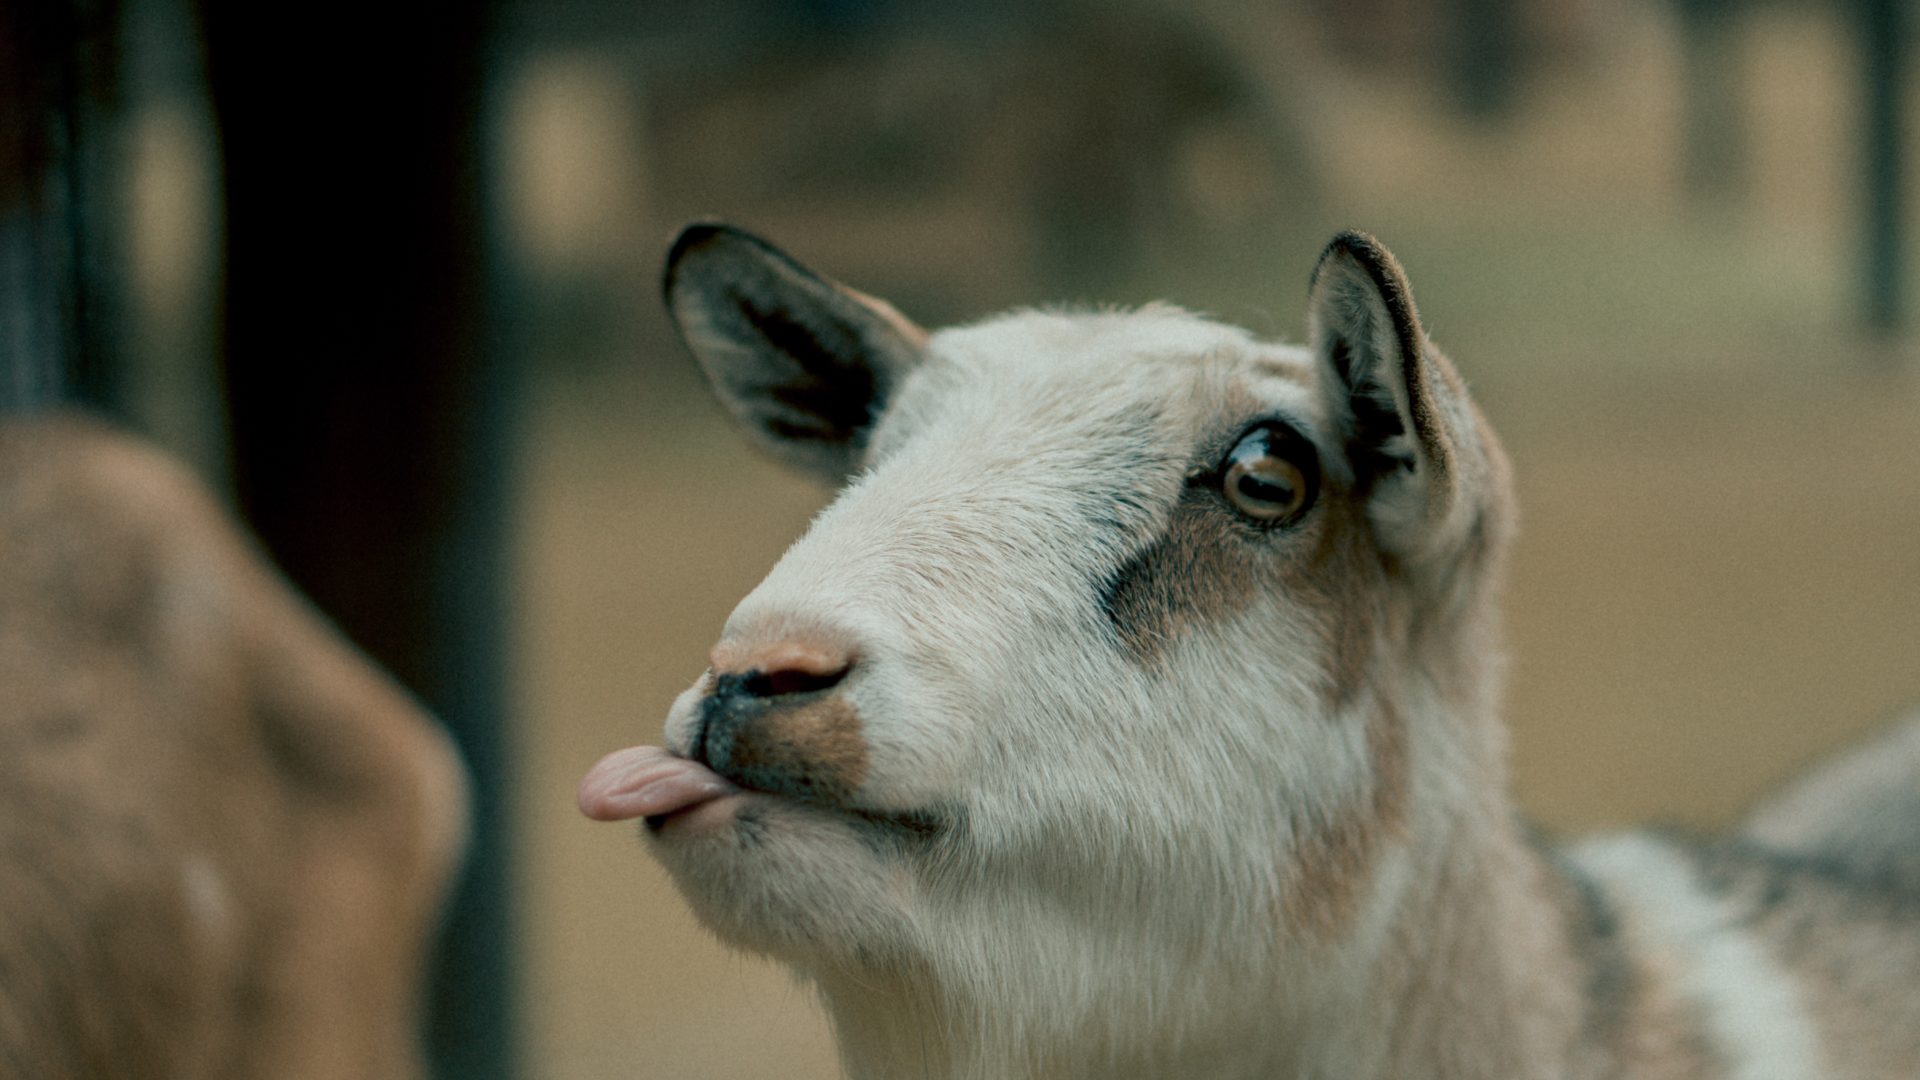 Goat with Tongue out